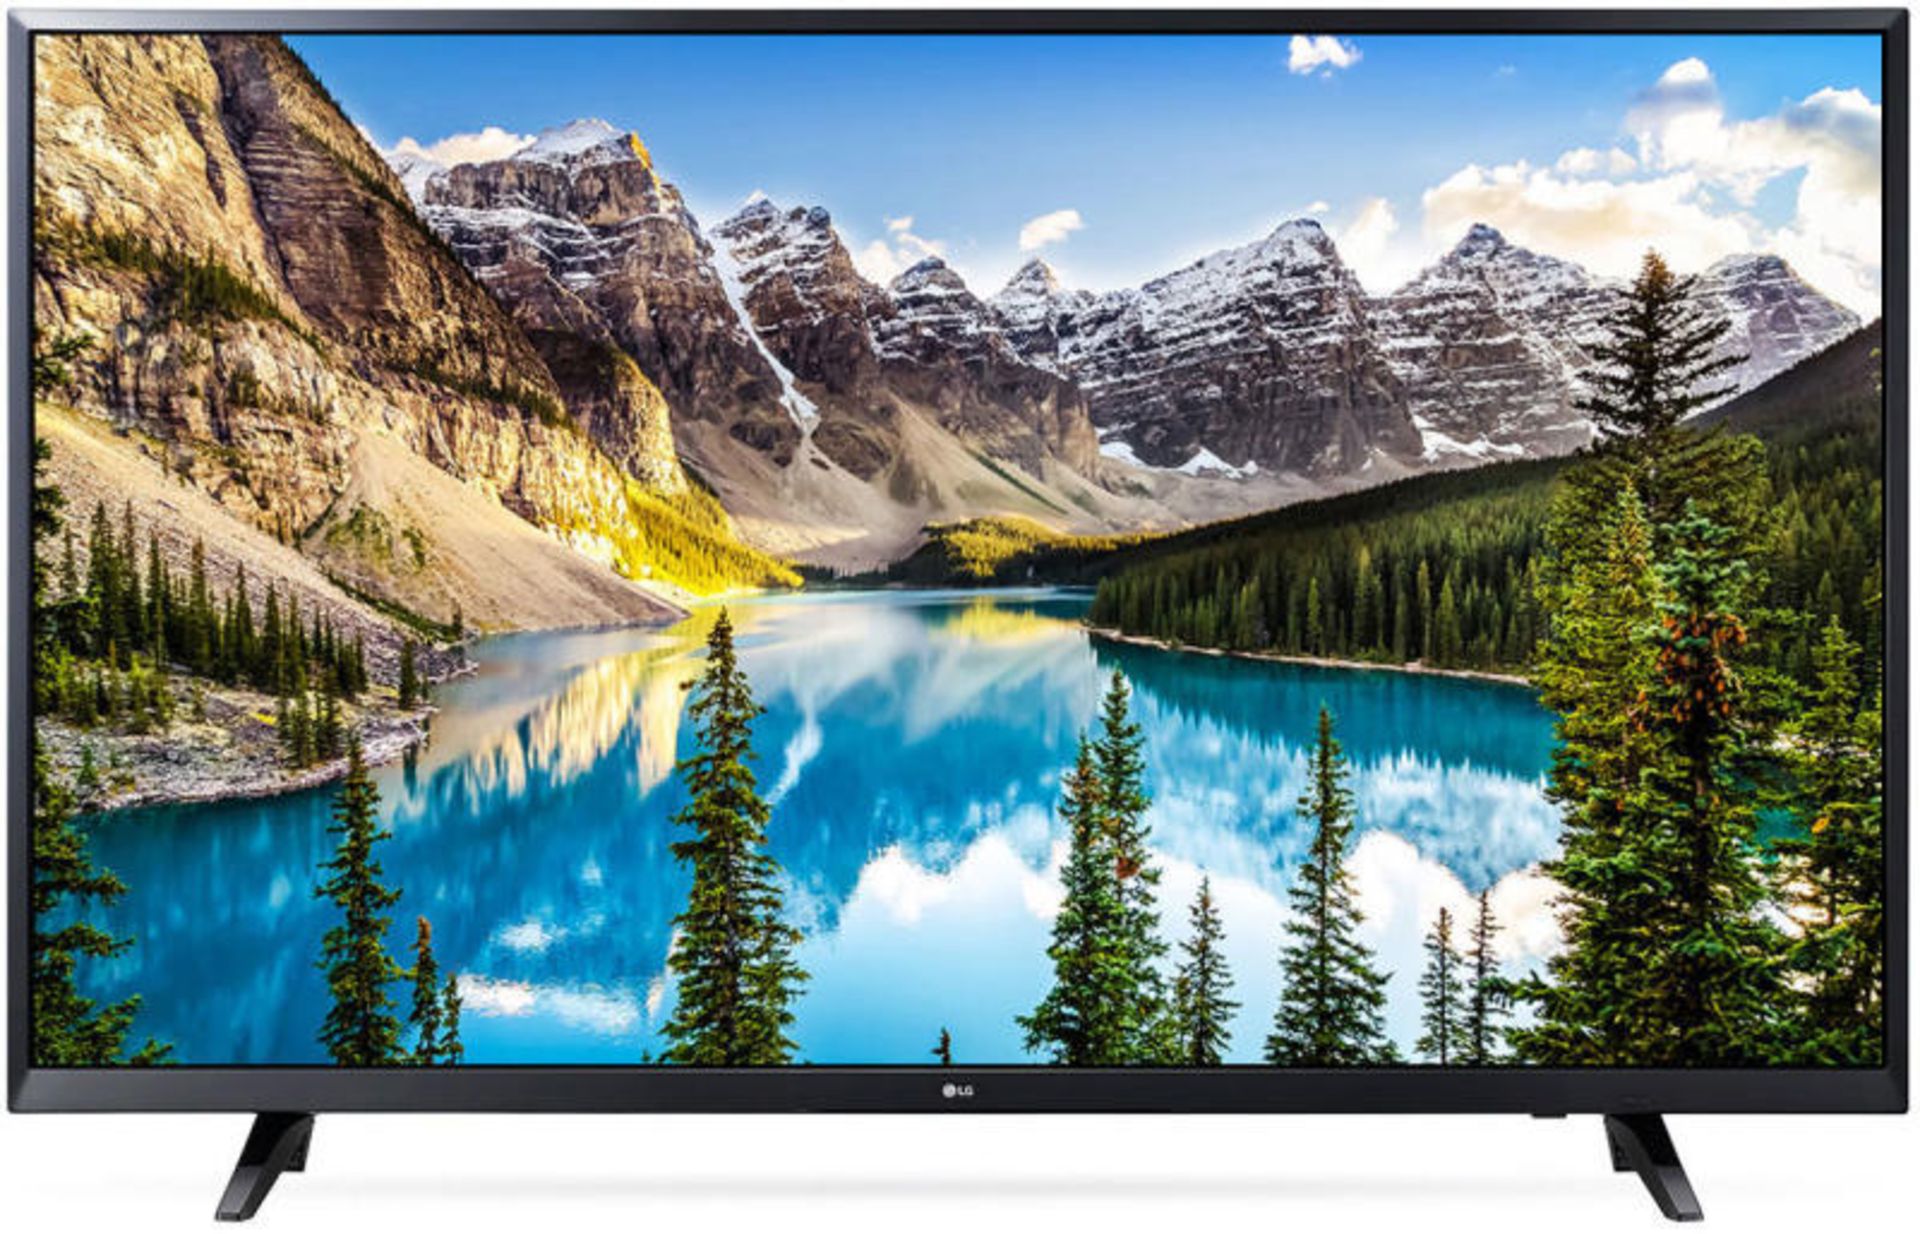 + VAT Grade A LG 43 inch ACTIVE HDR 4K ULTRA HD LED SMART TV WITH FREEVIEW HD & WEBOS 3.5 & WIFI